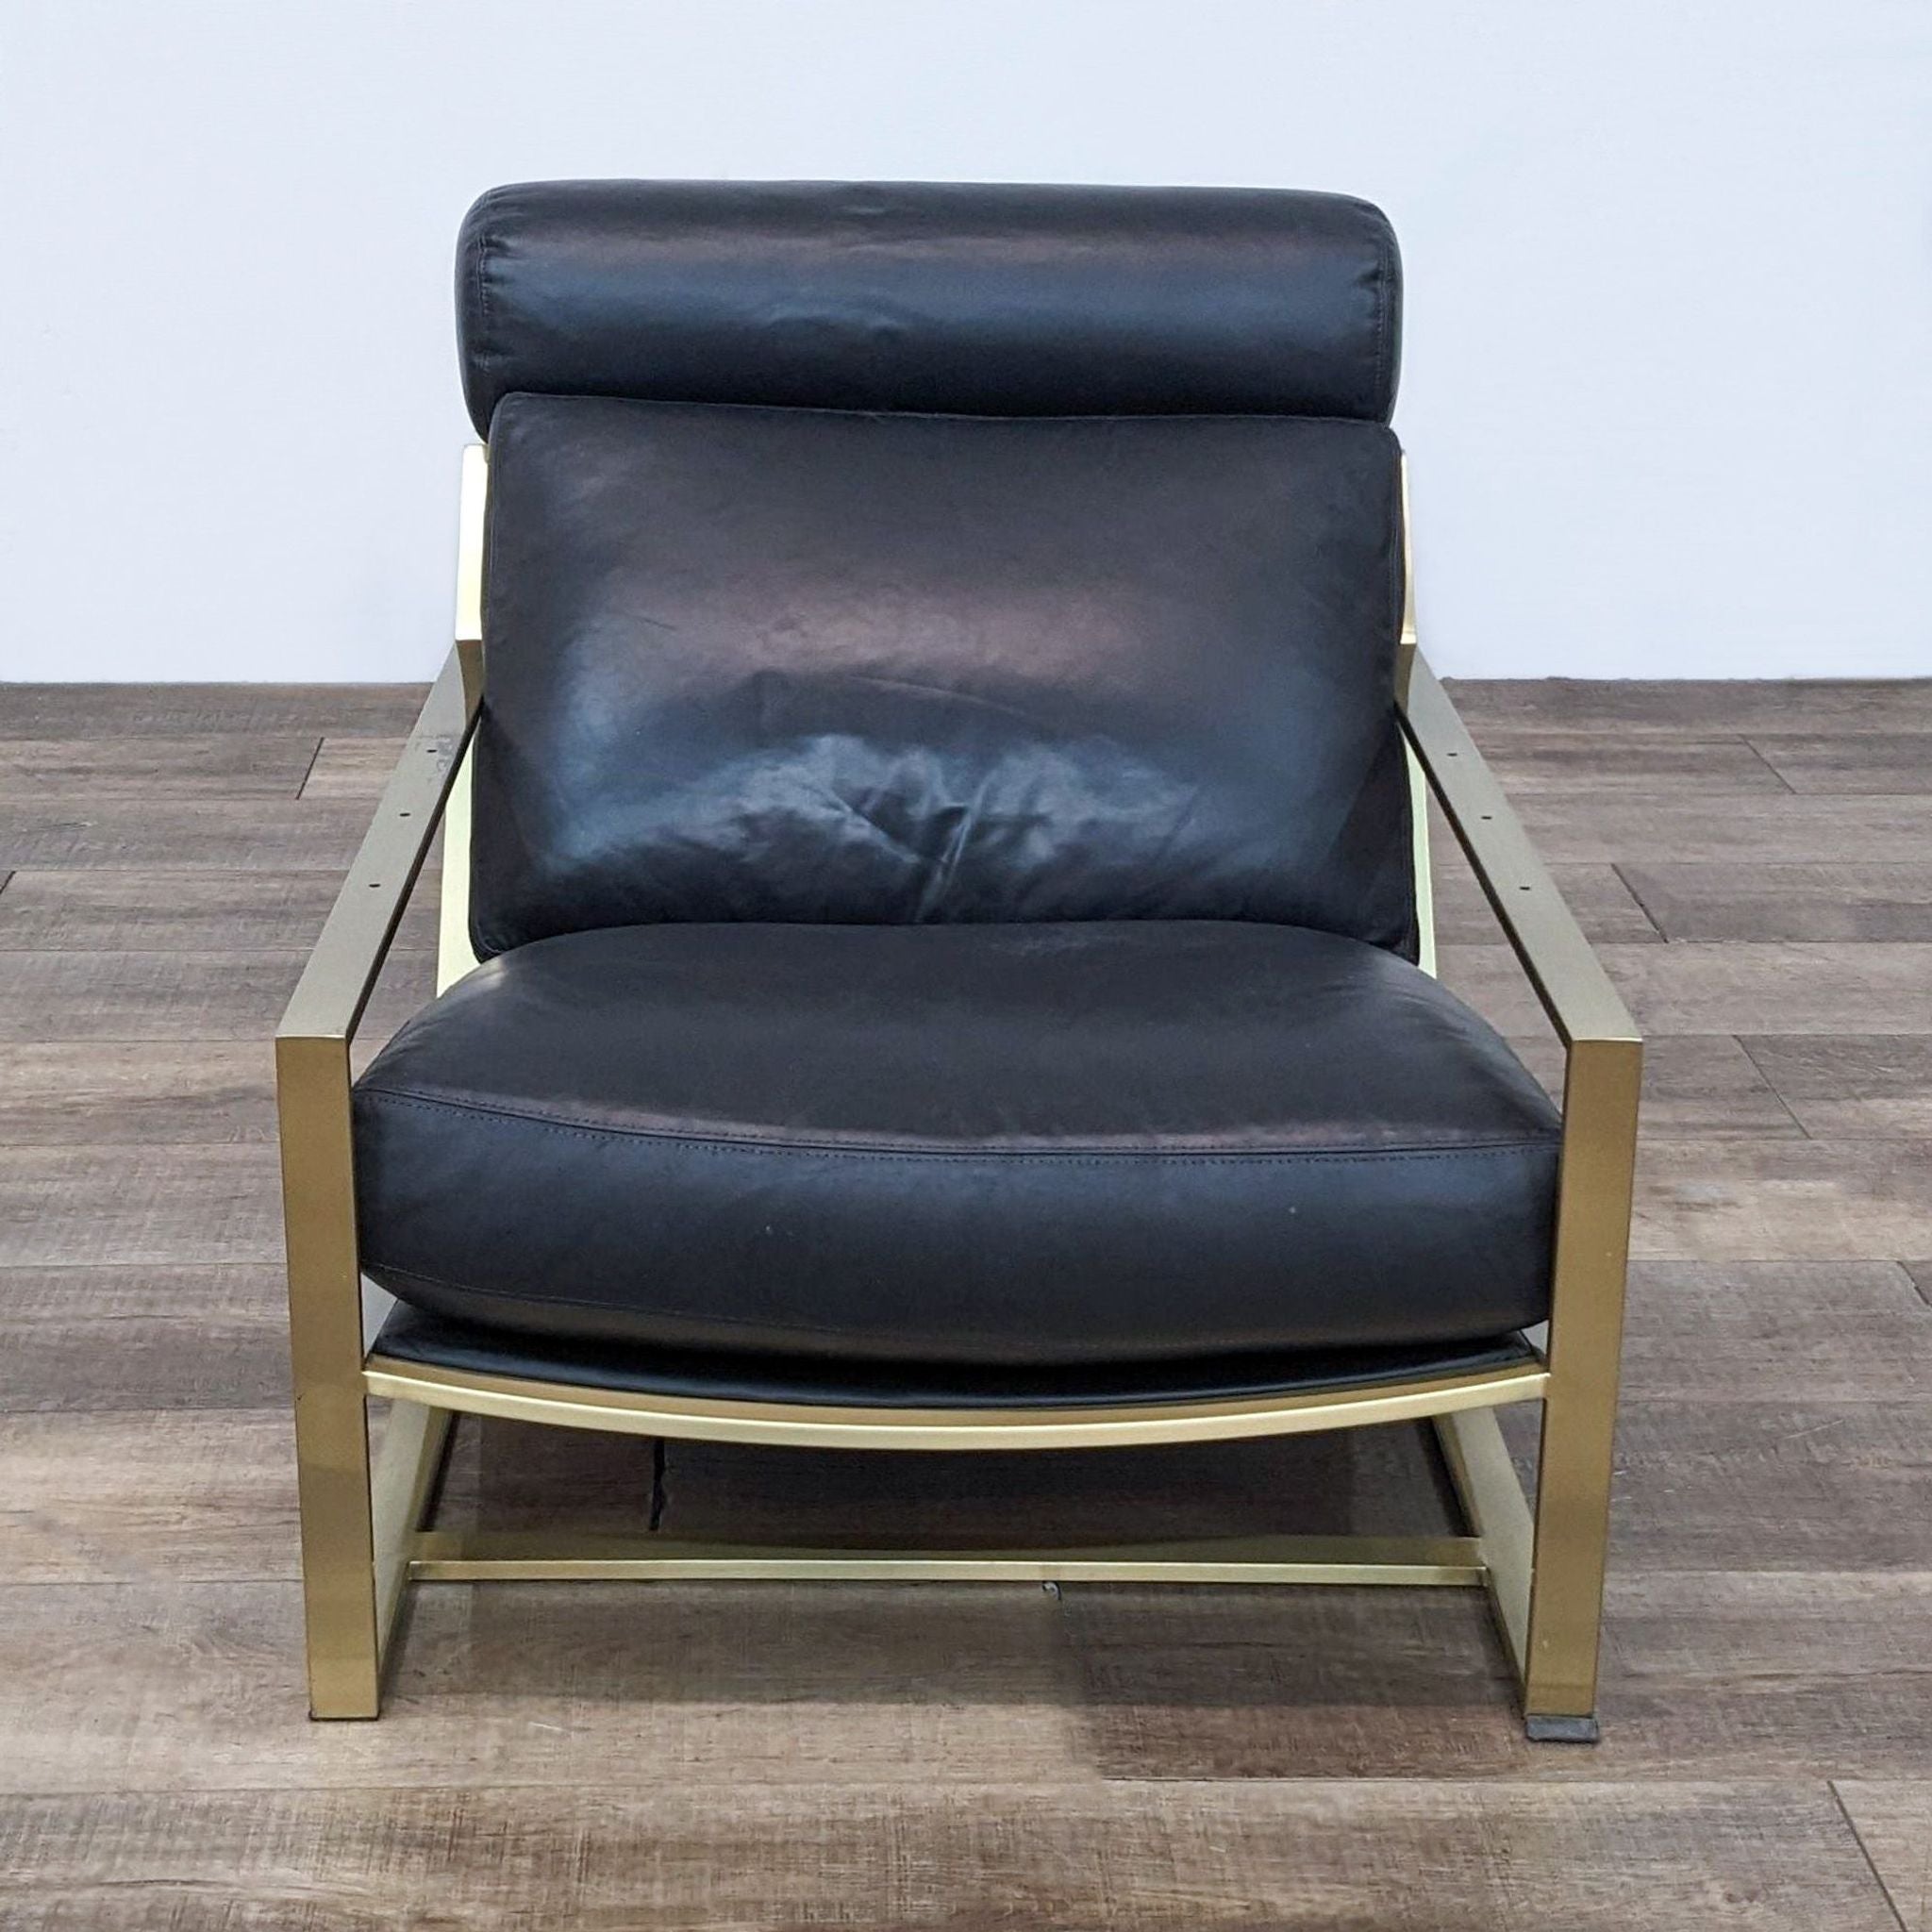 Alt text 1: Milo Baughman's Cruisin' lounge chair by Thayer Coggin with a brushed bronze frame and black leather upholstery, front view.